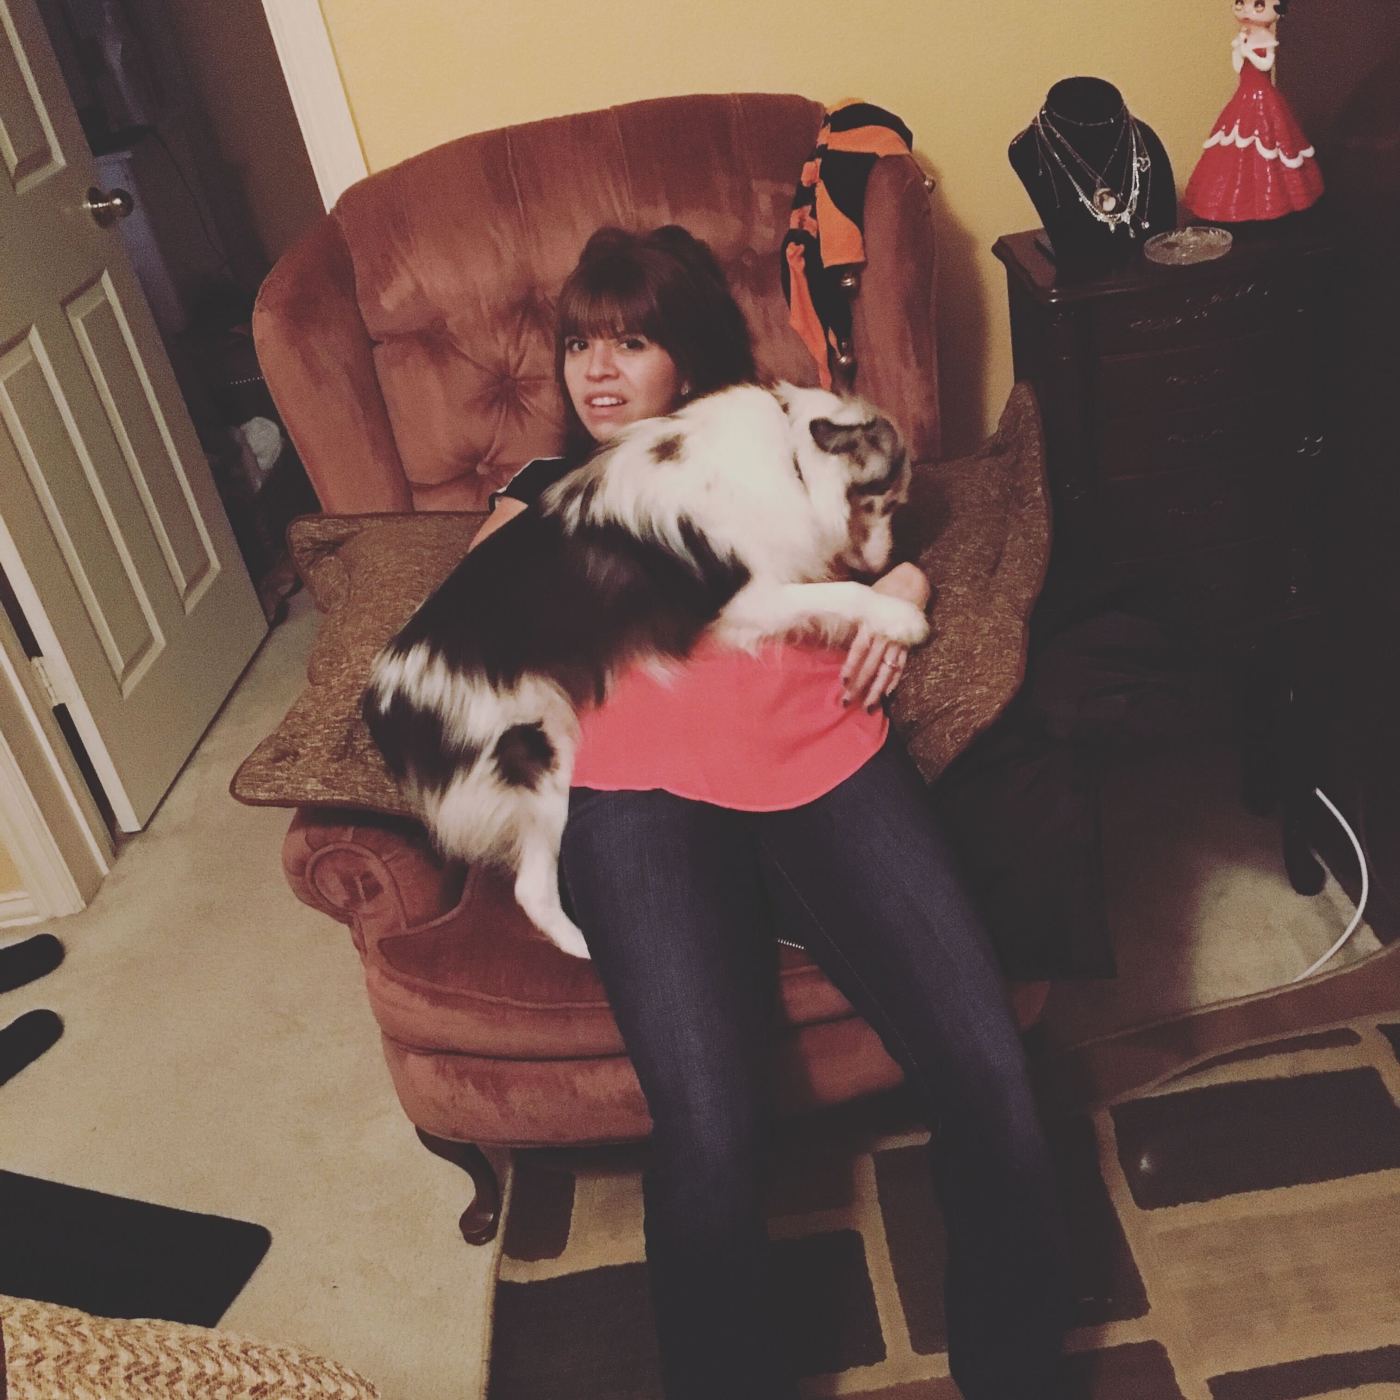 Krystina snuggling with a very beautiful dog